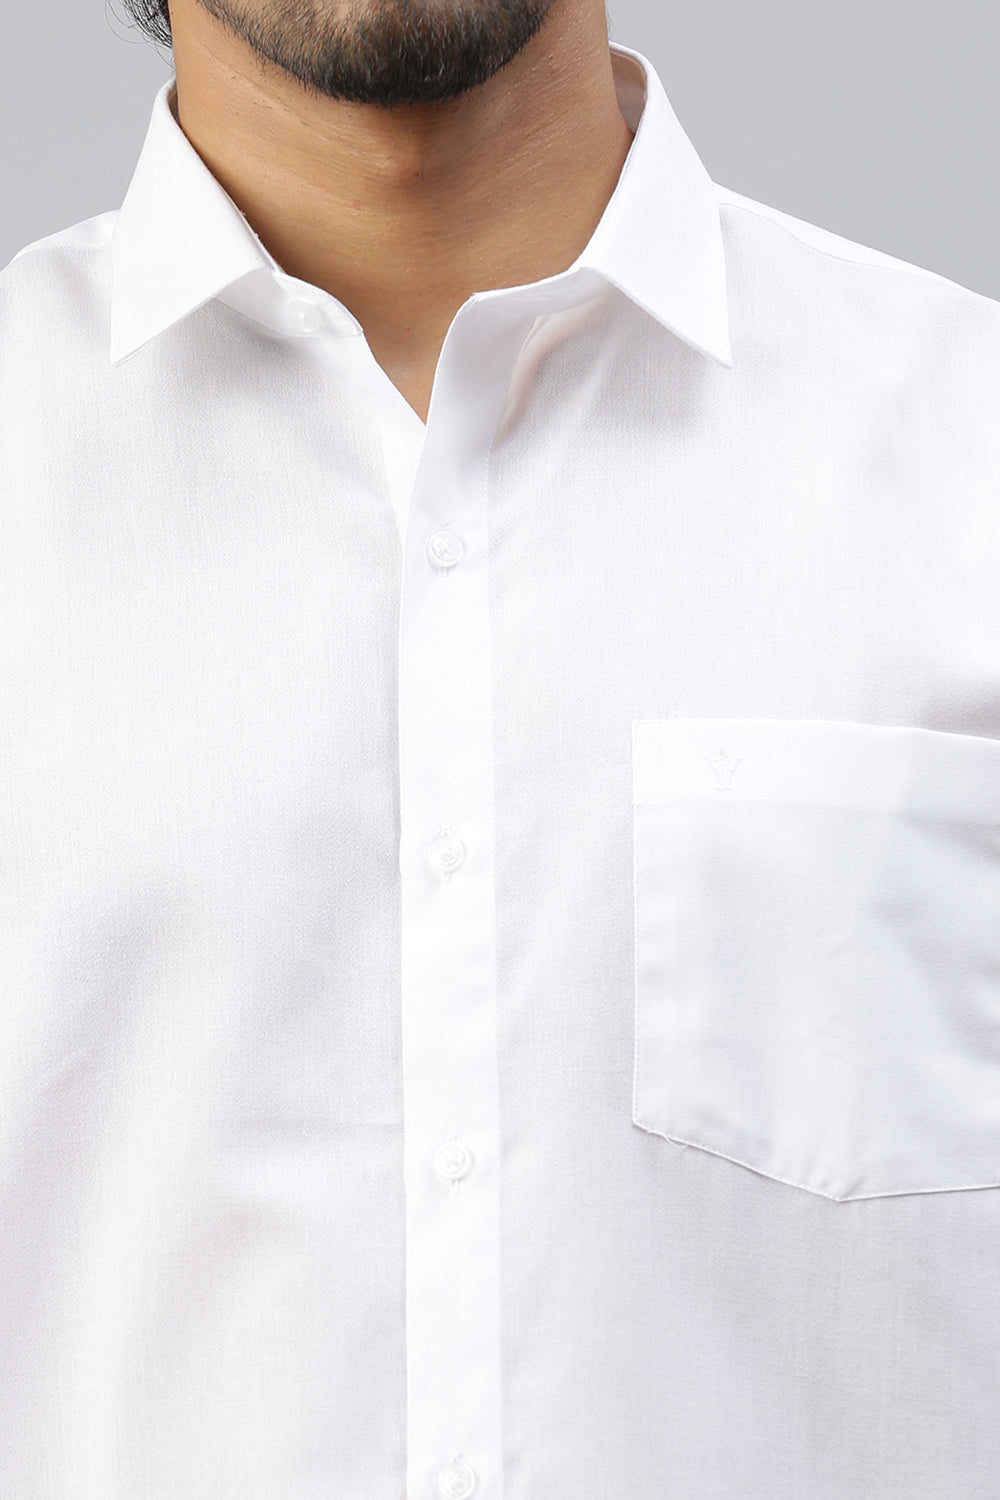 Mens Cotton White Shirt Full Sleeves Viceroy-Zoom view